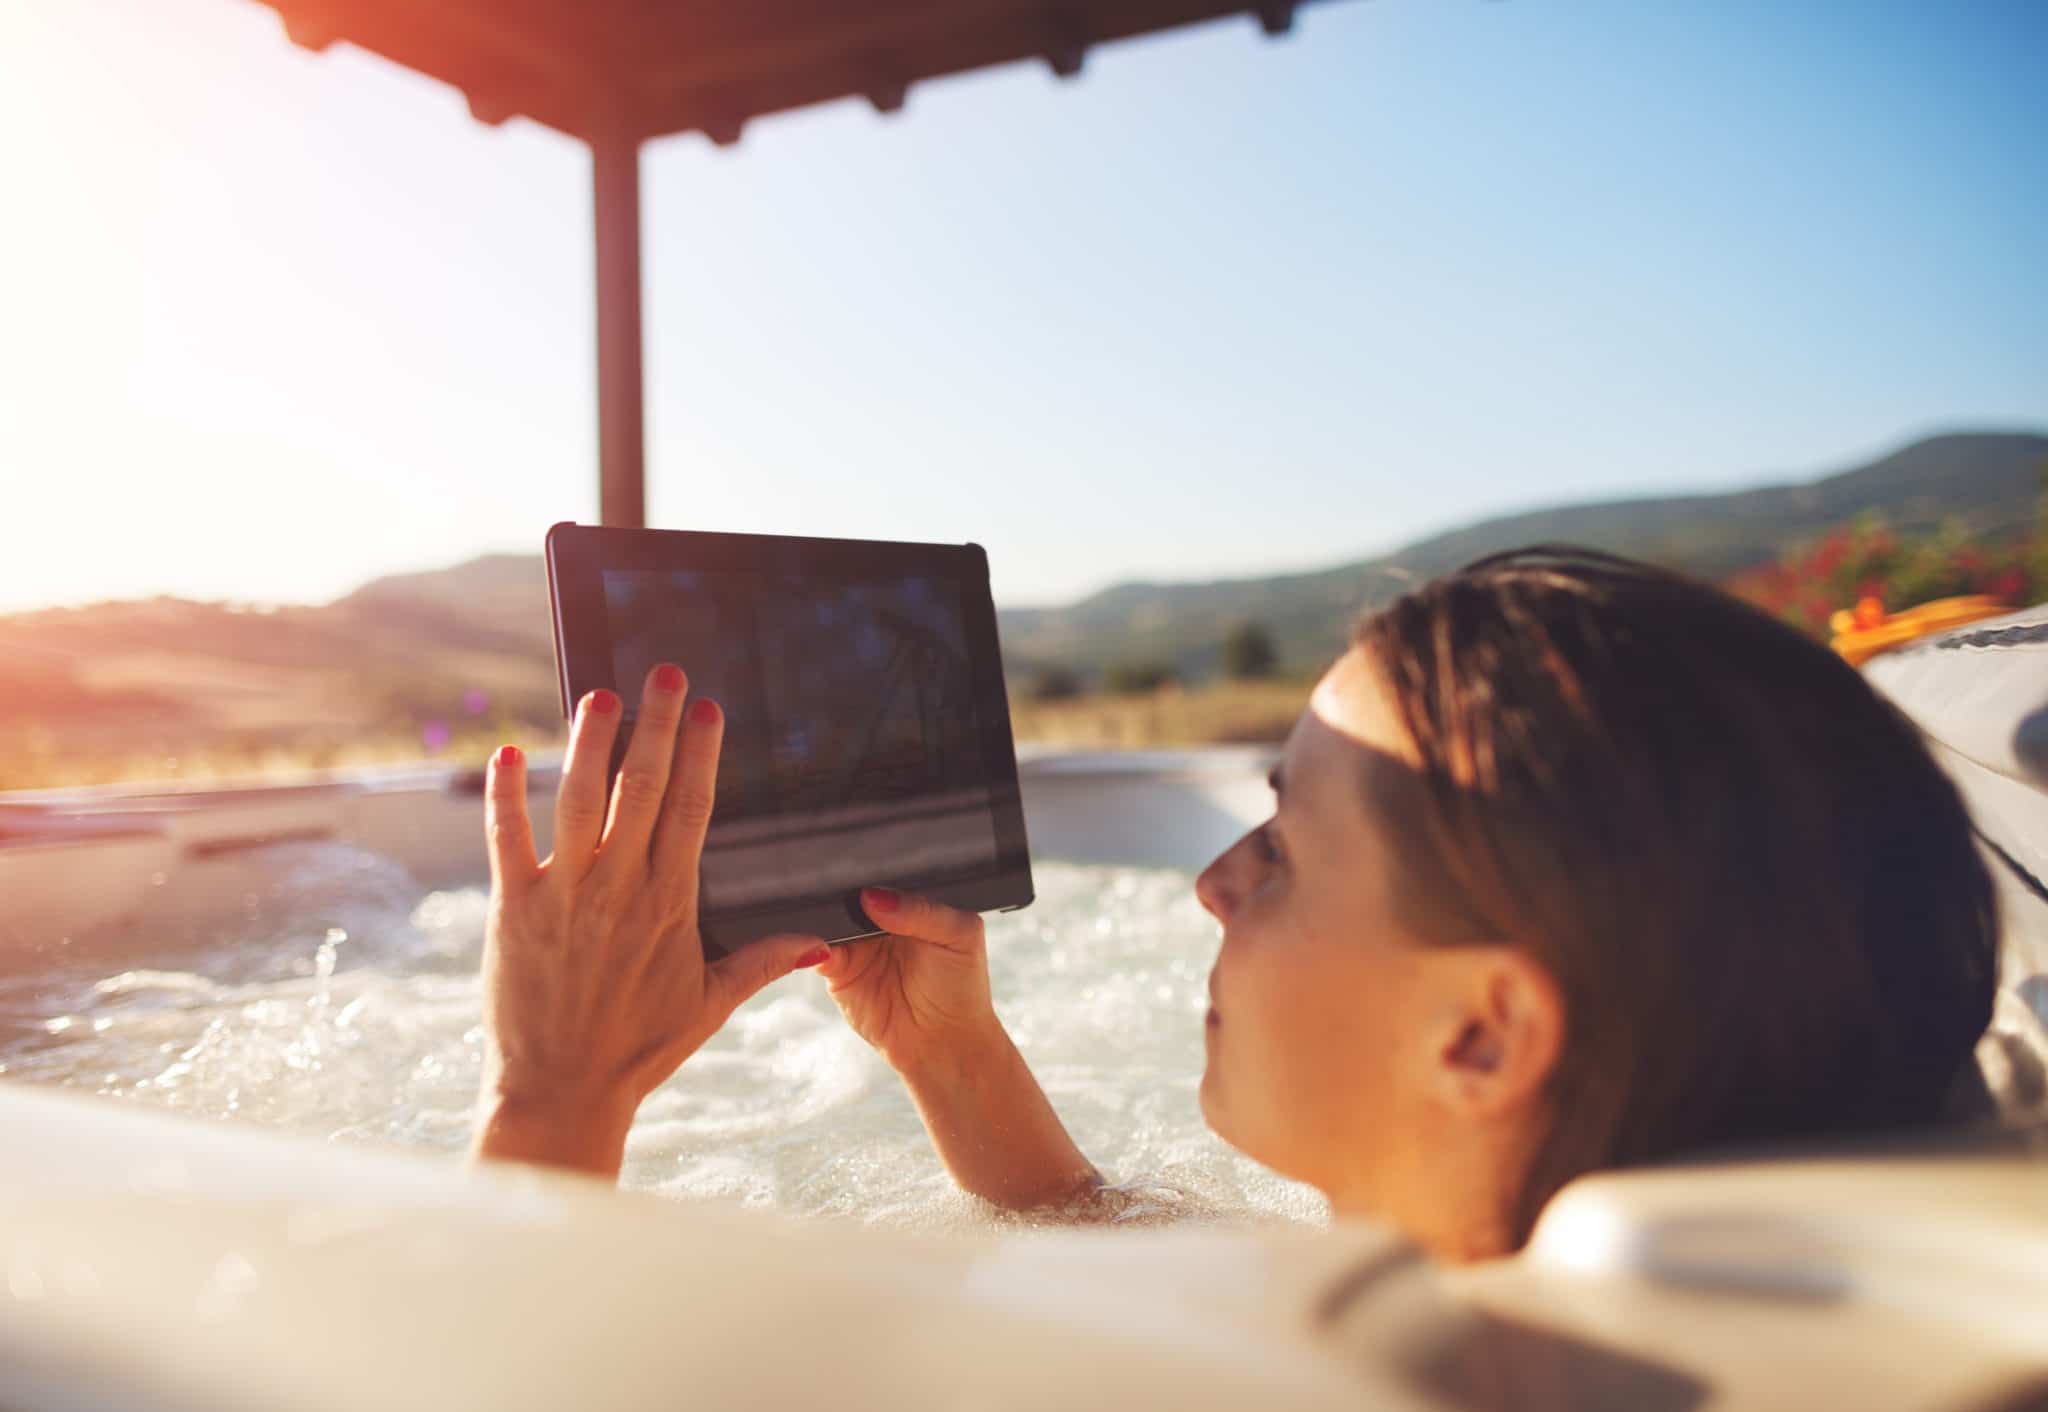 The Best Hot Tub Gadgets, Accessories & Tech